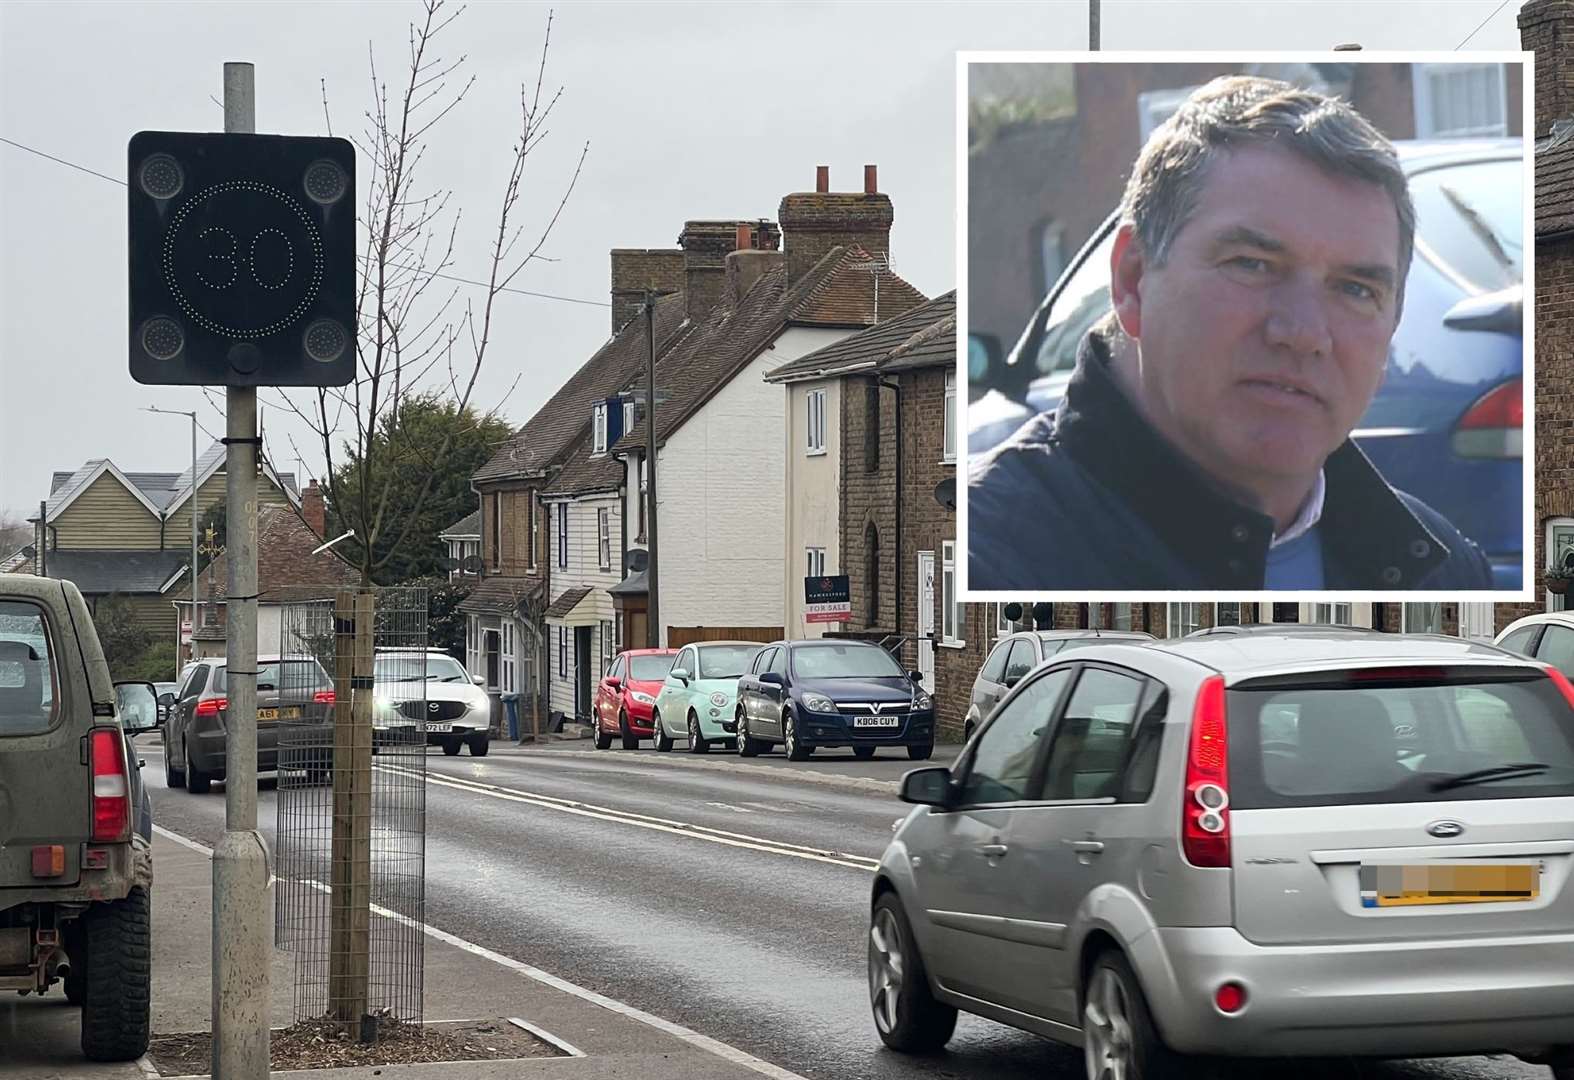 Cllr Mike Whiting is calling for speed cameras along London Road in Teynham